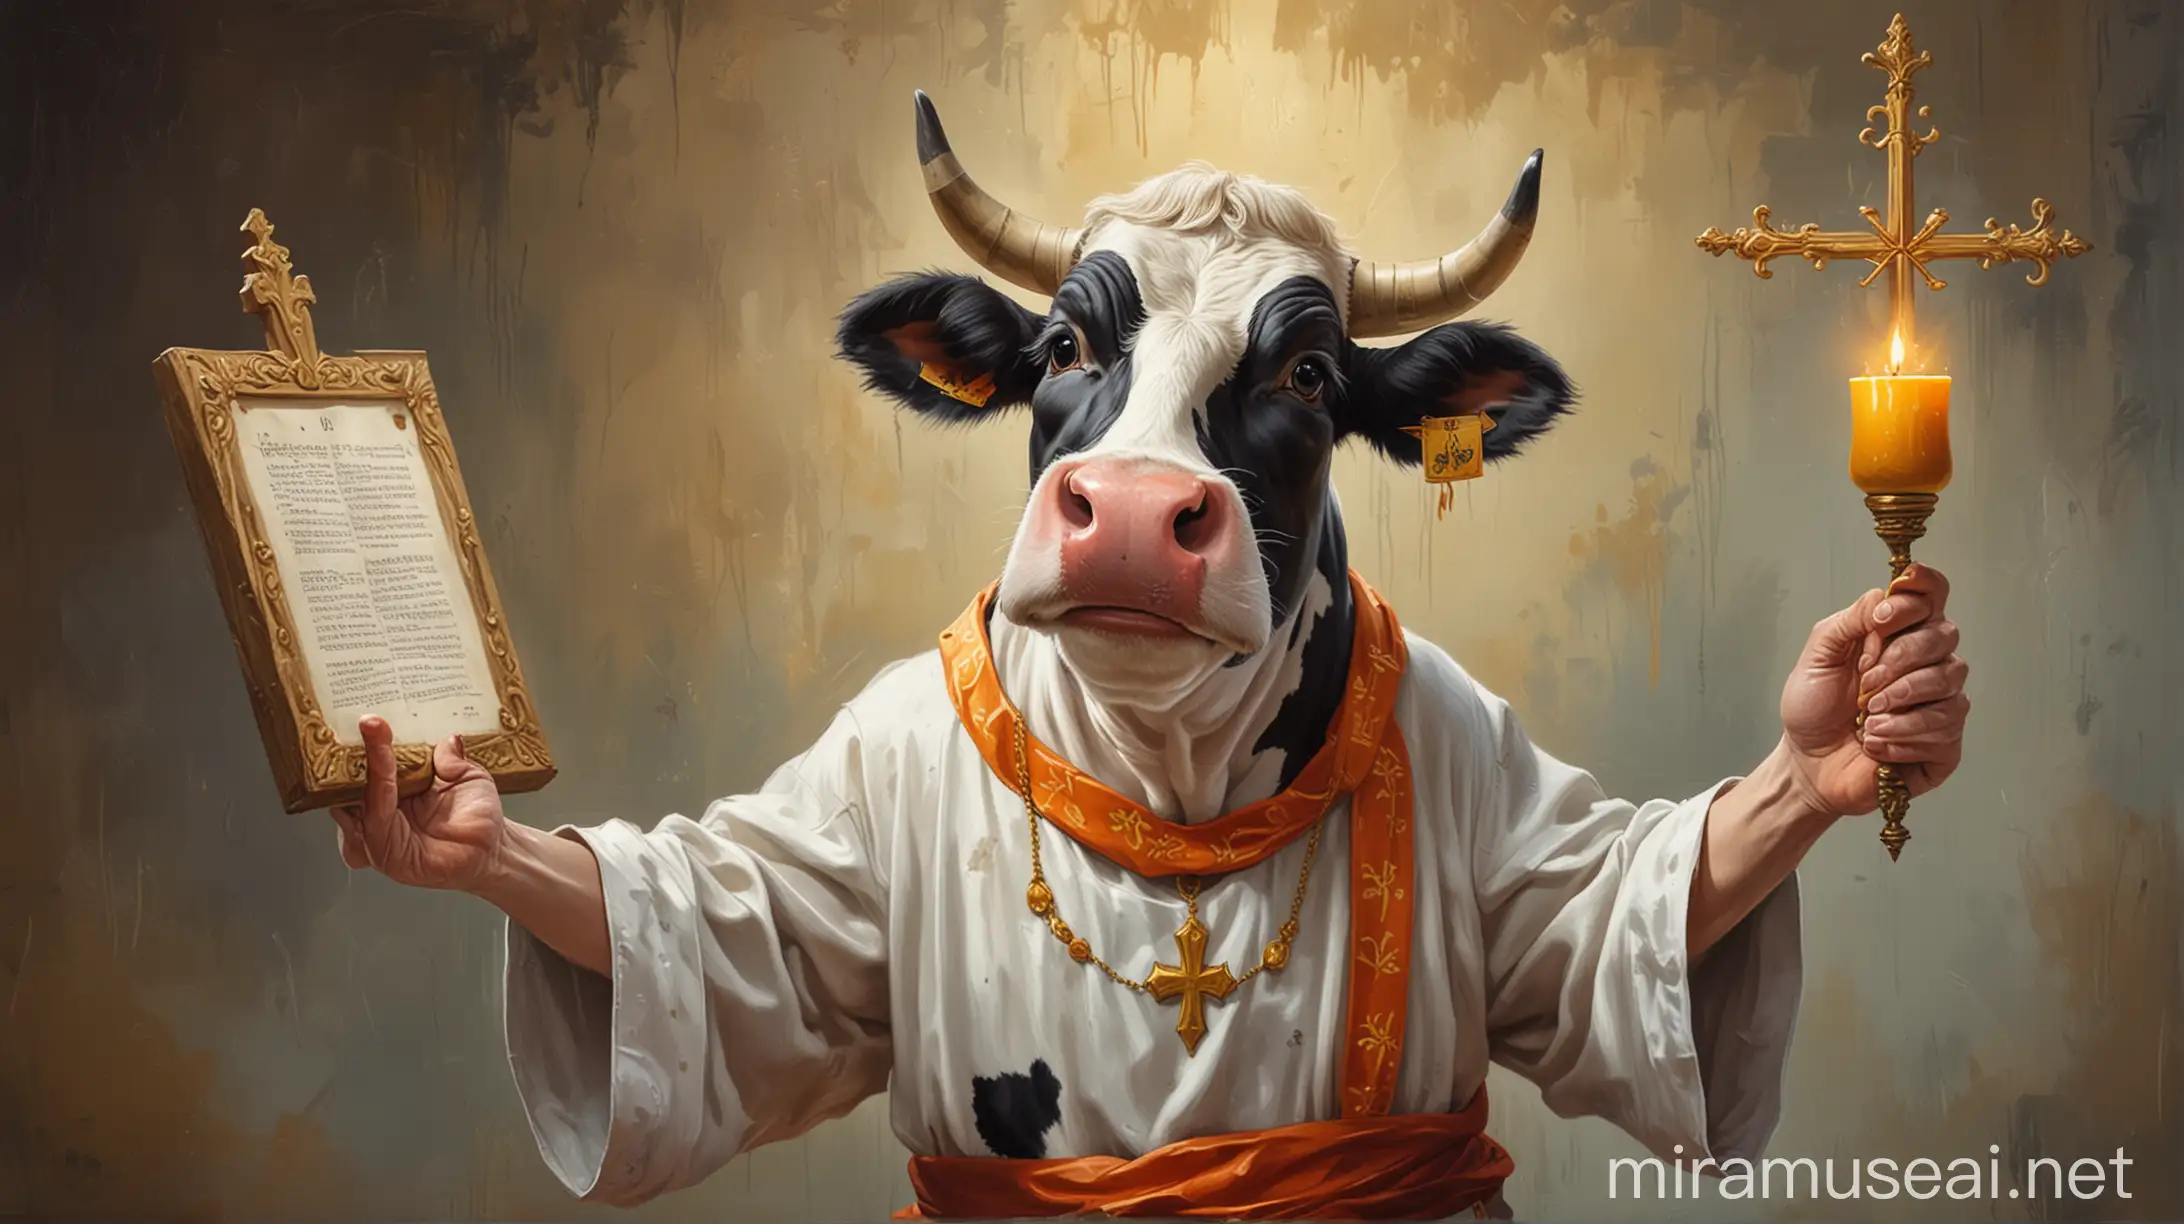 an oil painting cartoon cow plays the role of priest
